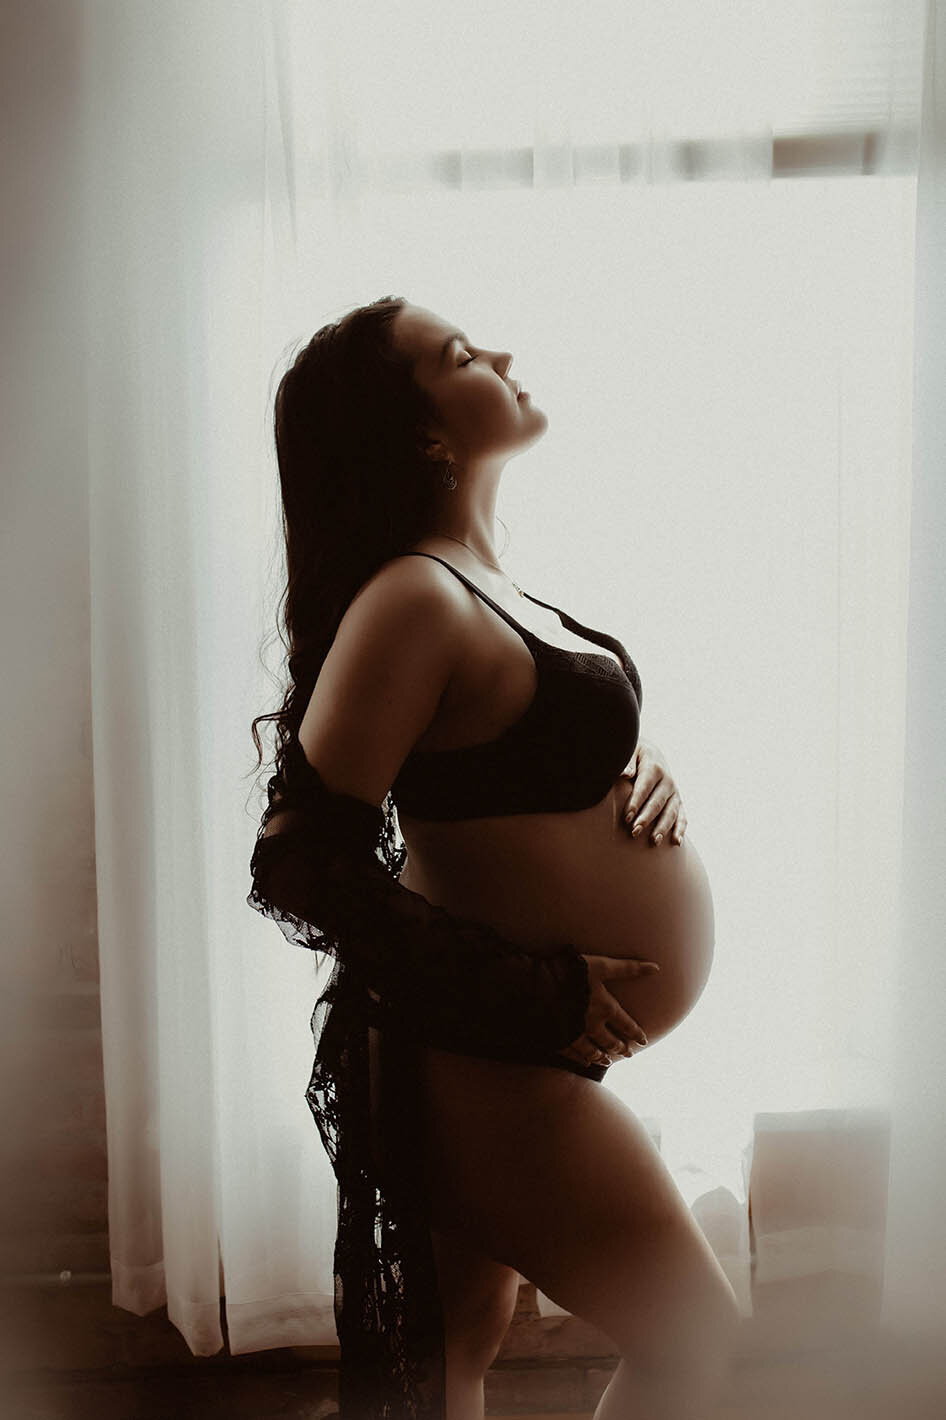 A silhouette shot of a pregnant woman